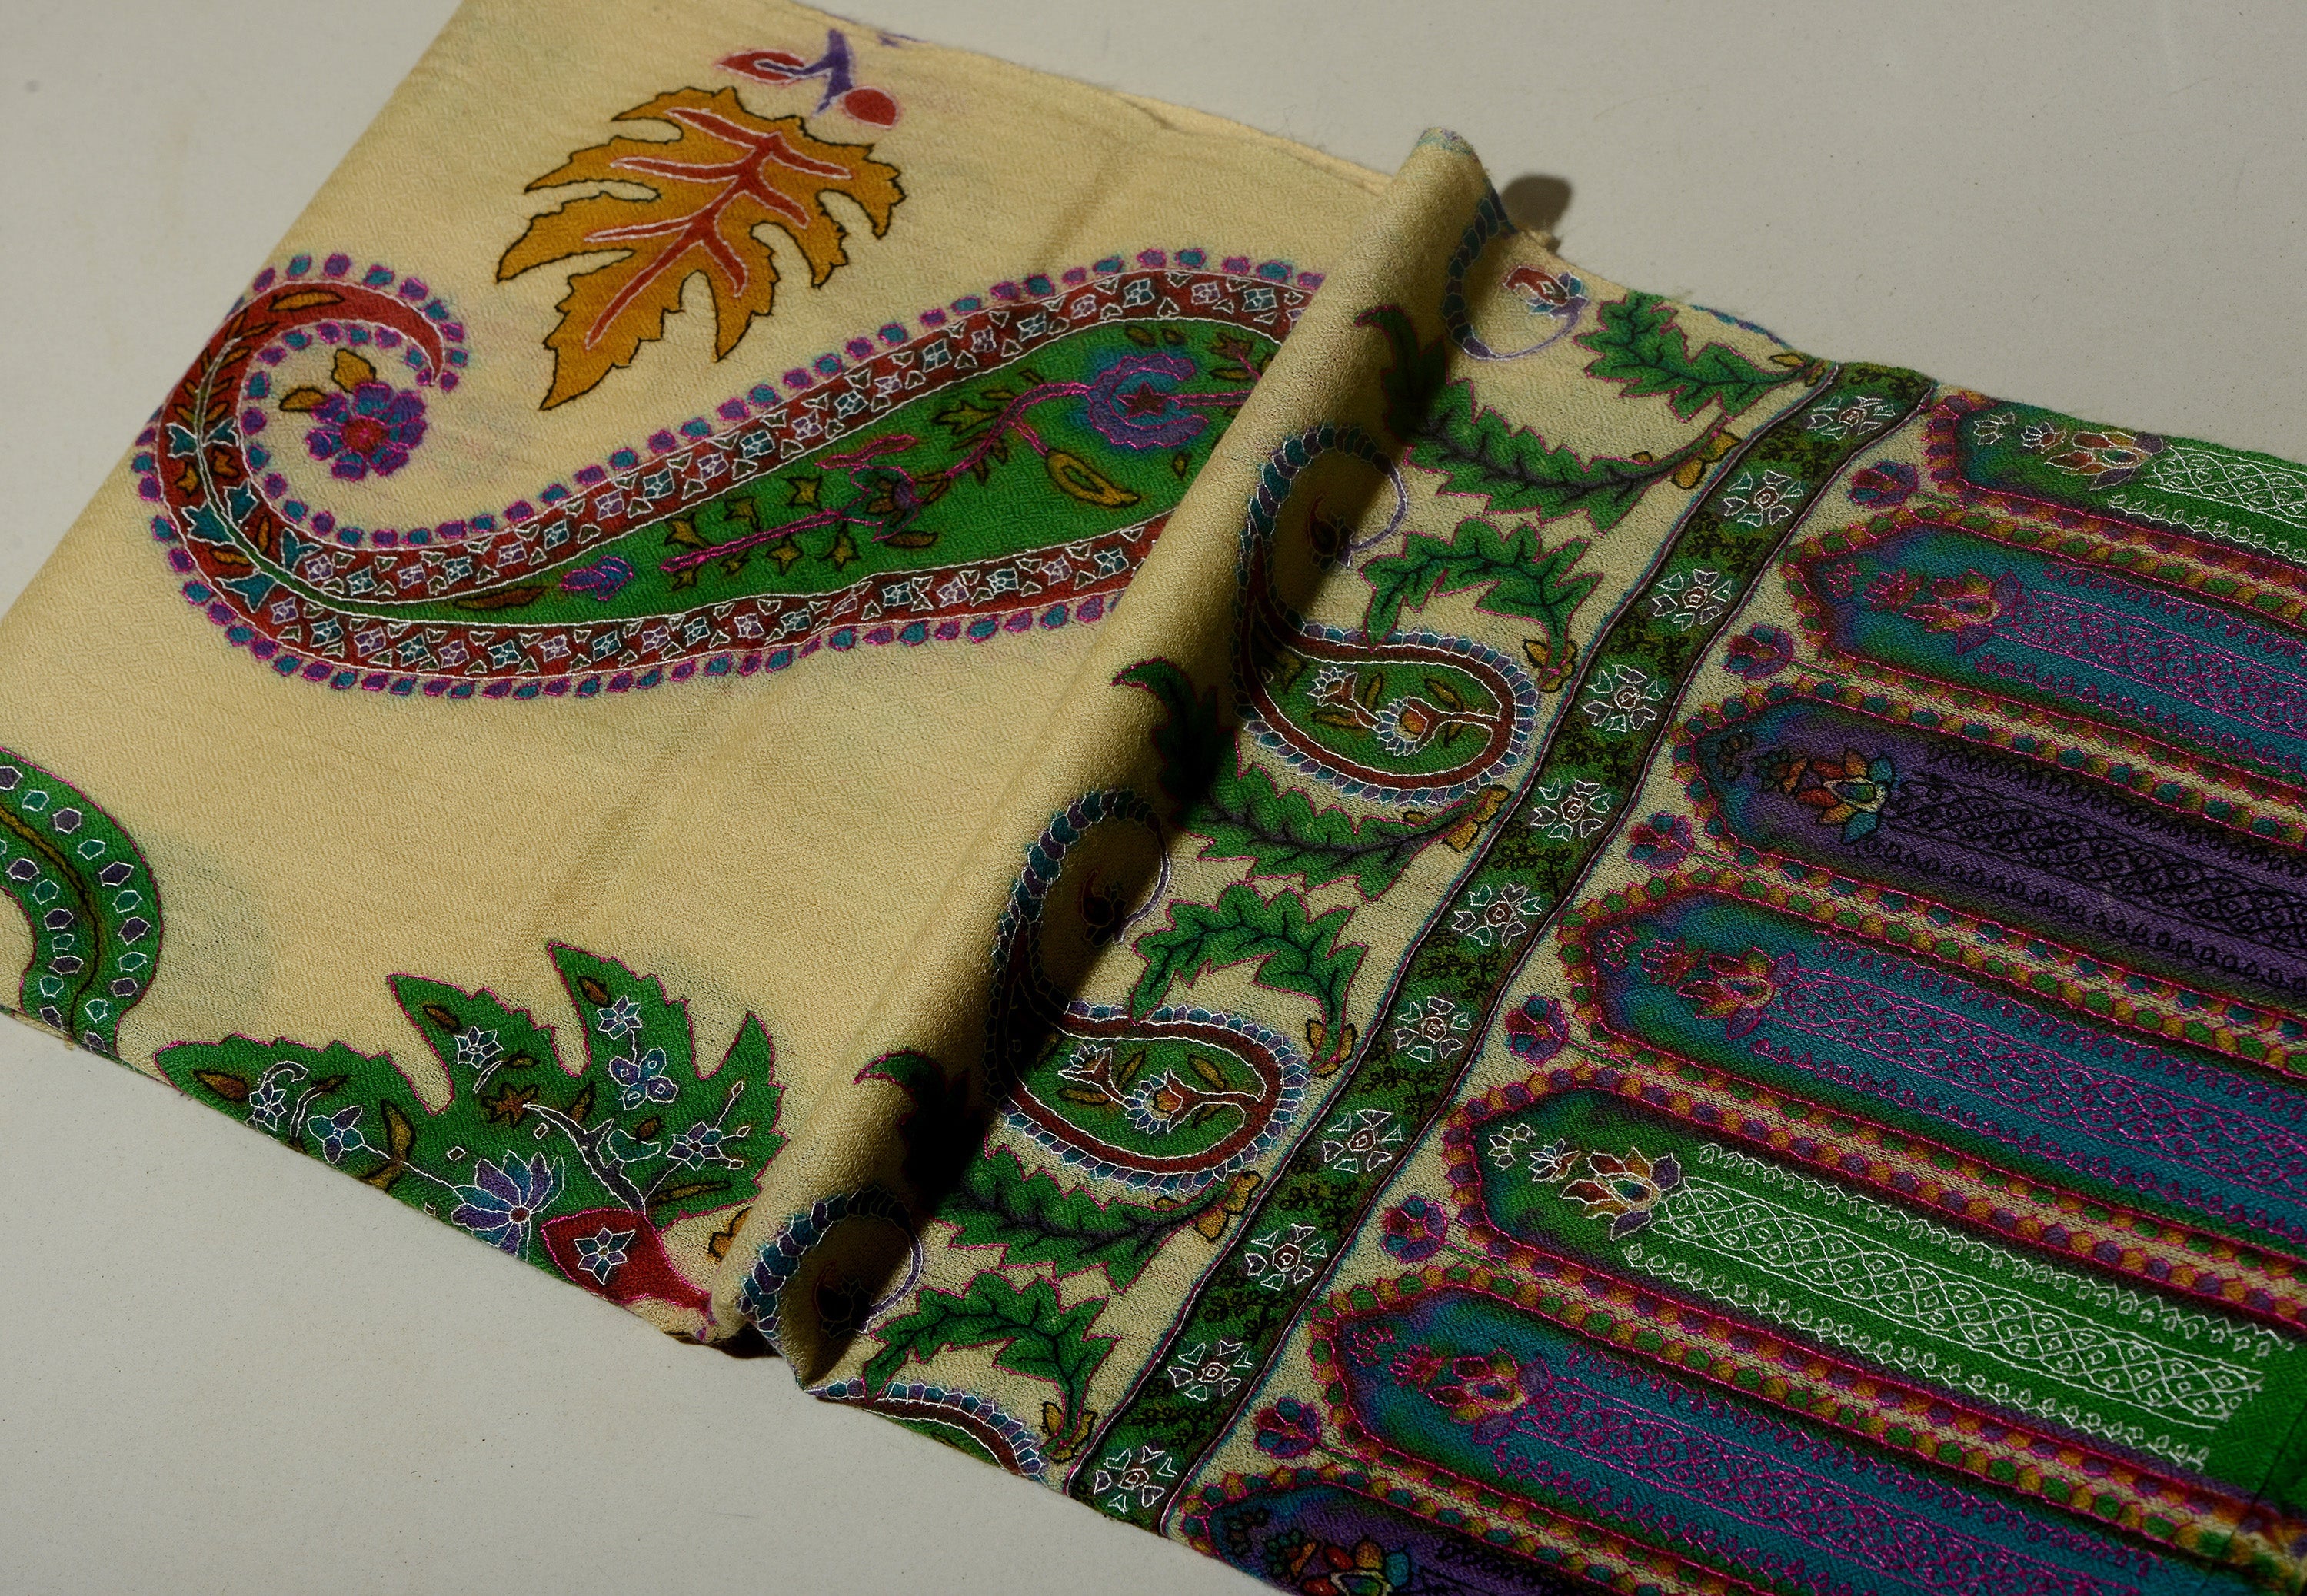 PAISLEY FLORAL Exquisite Kalamkari Kani Stole with Hand embroidery - Natural Cream